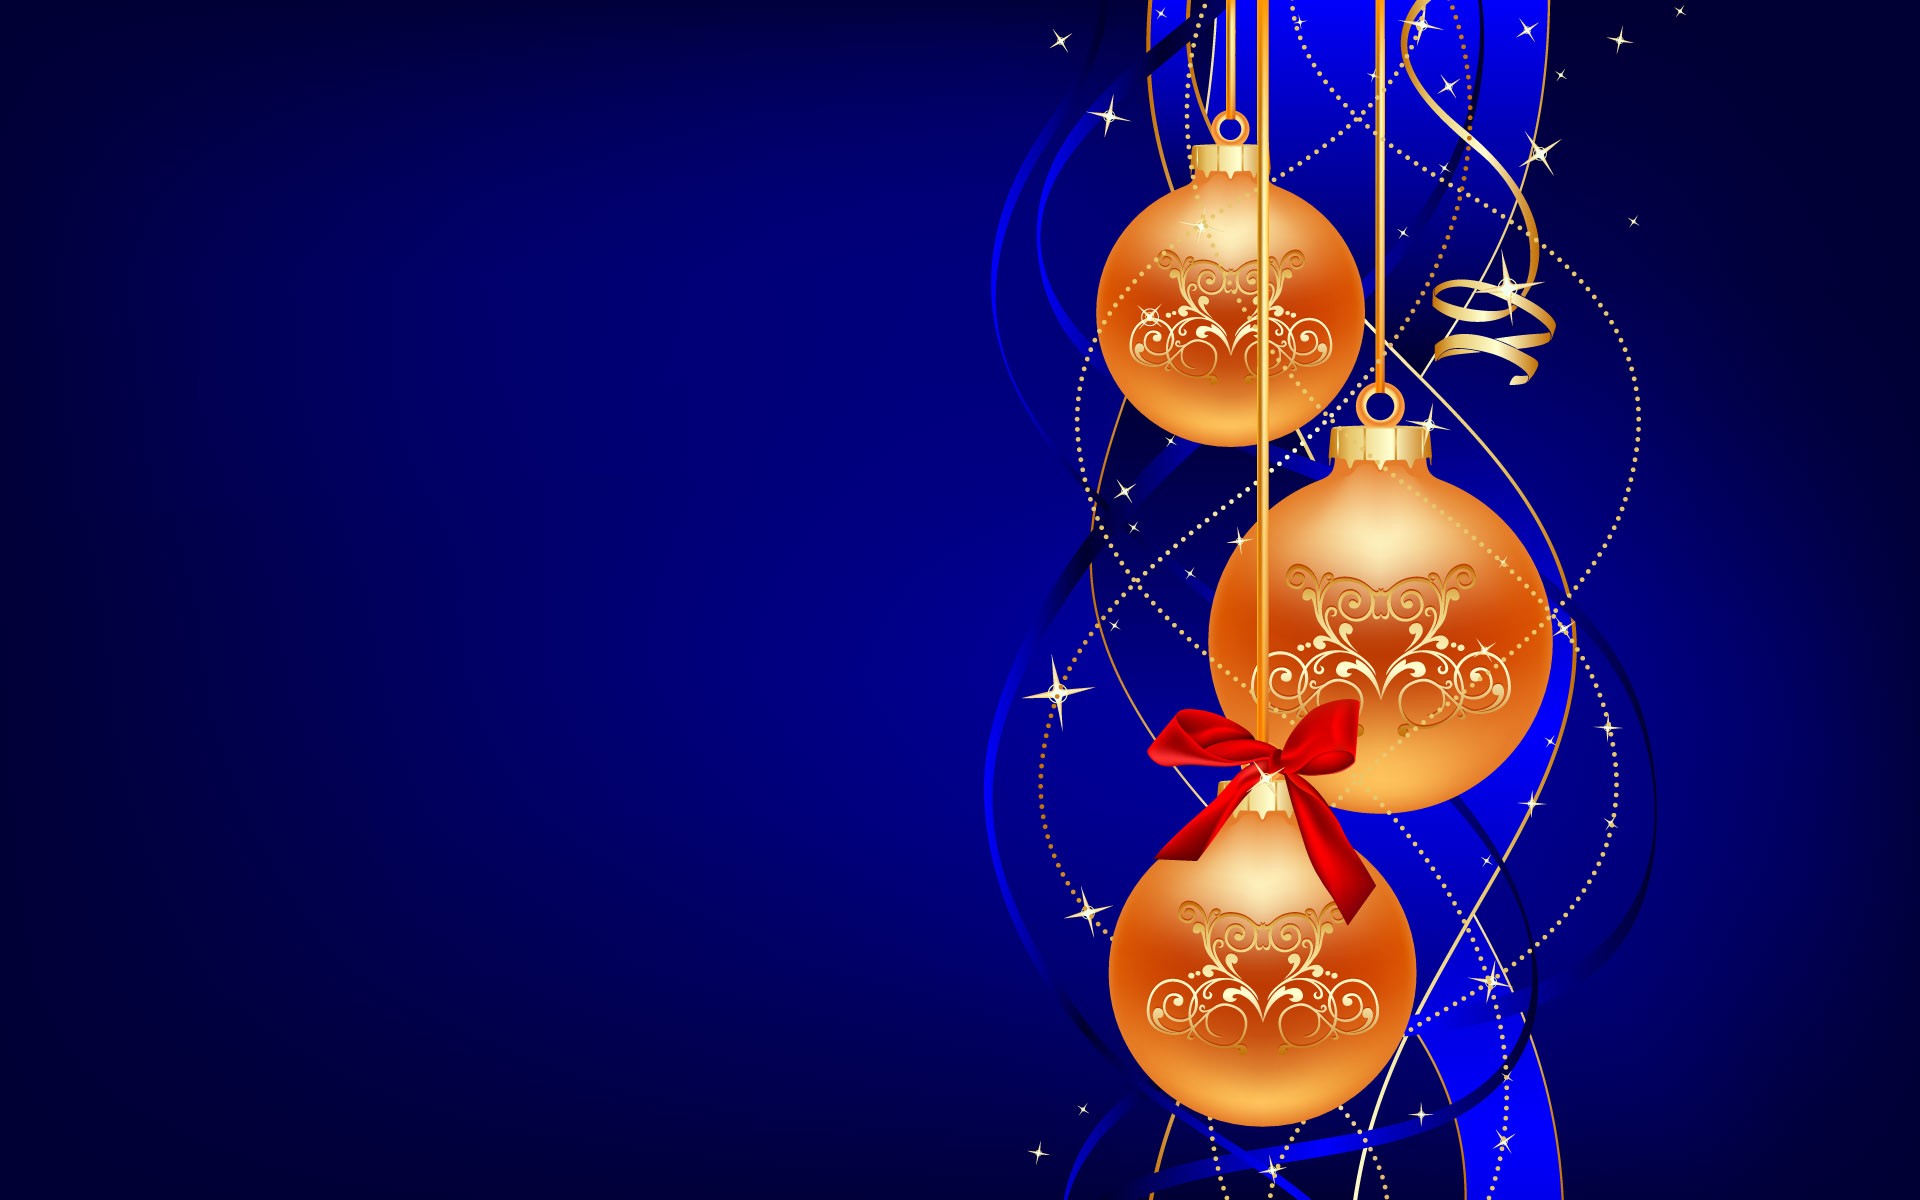 Exquisite Christmas Theme HD Wallpapers #26 - 1920x1200